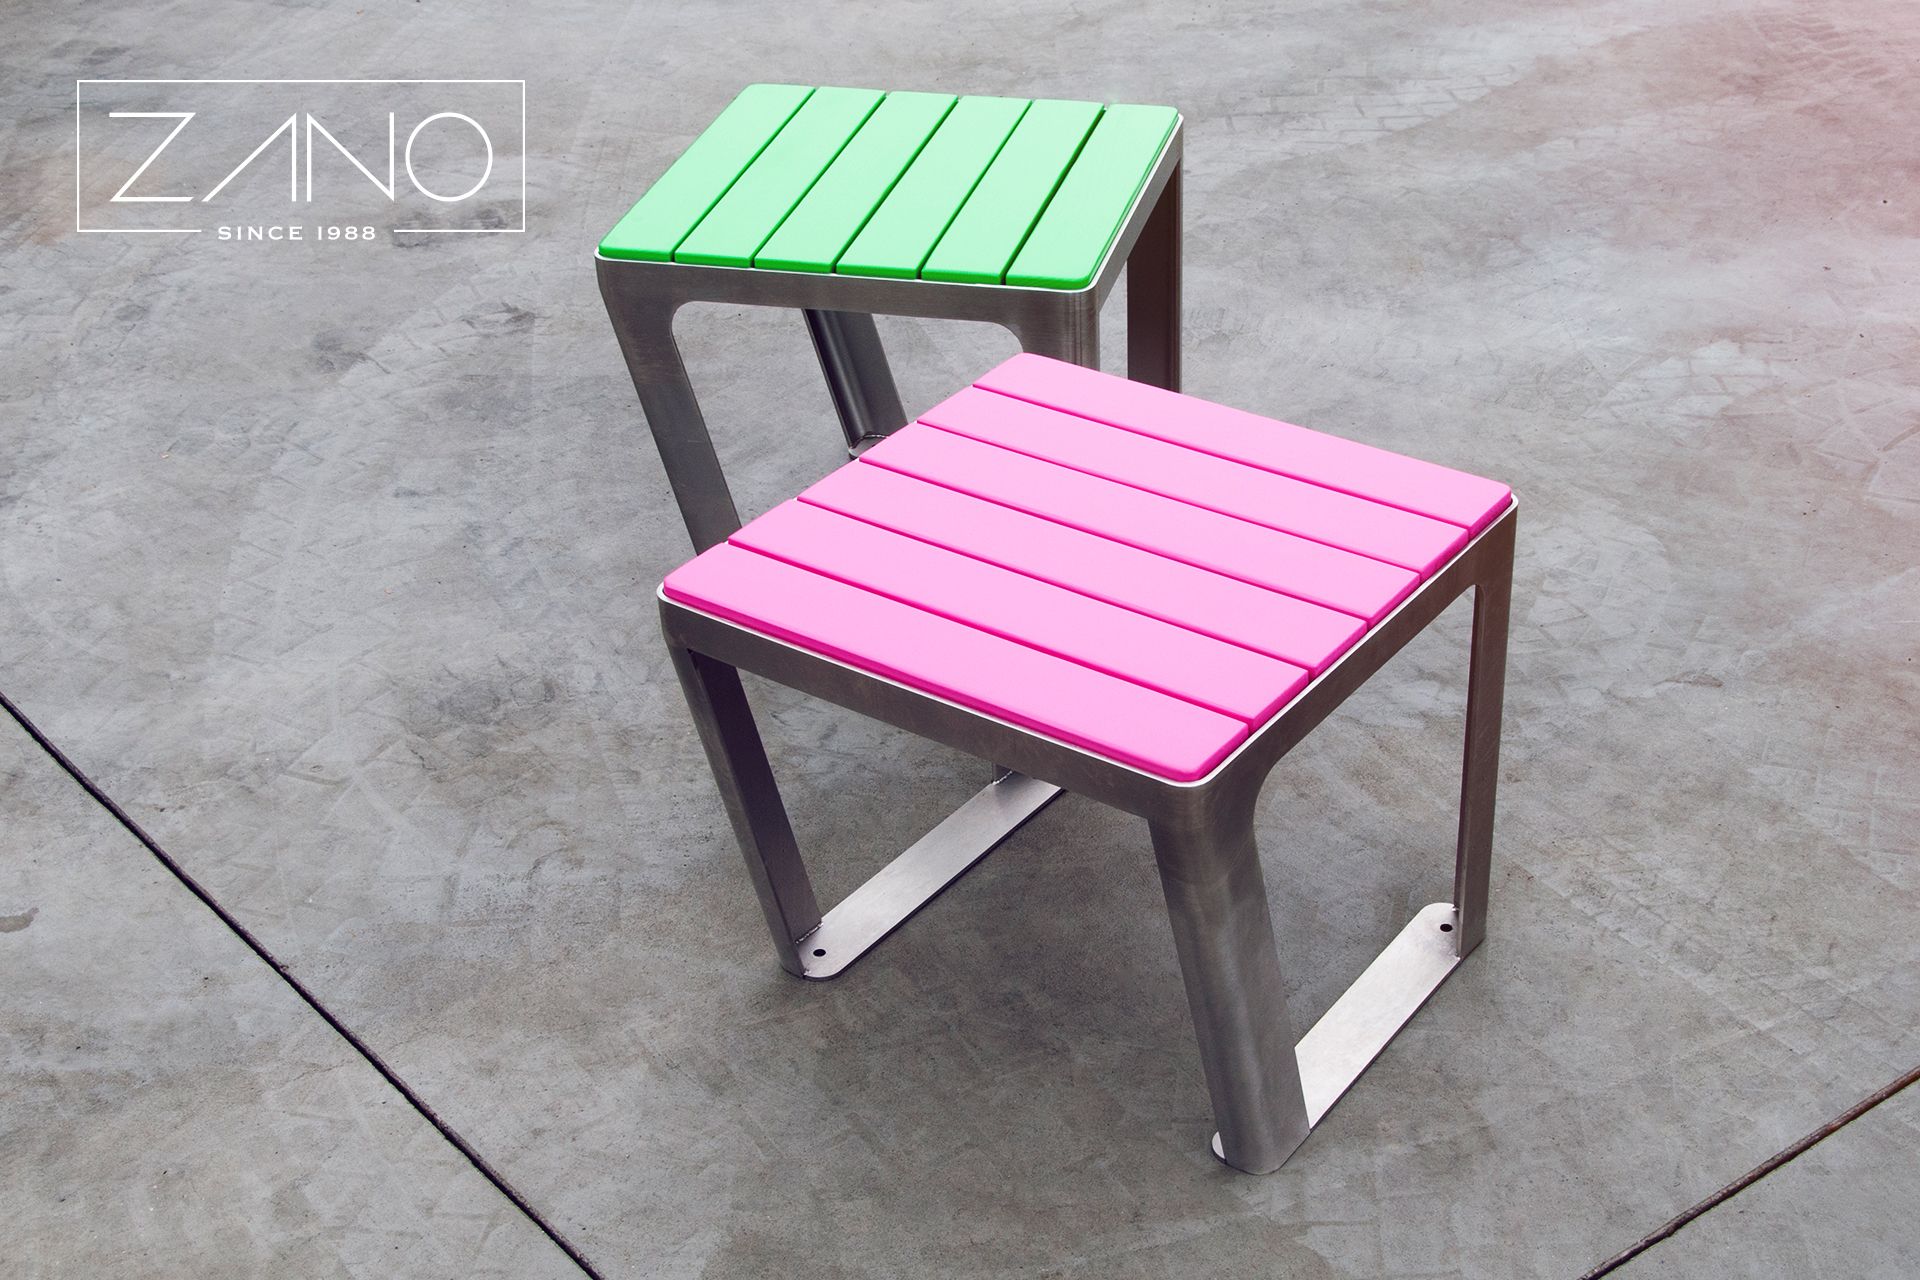 Single-seat bench made of stainless steel and painted wood